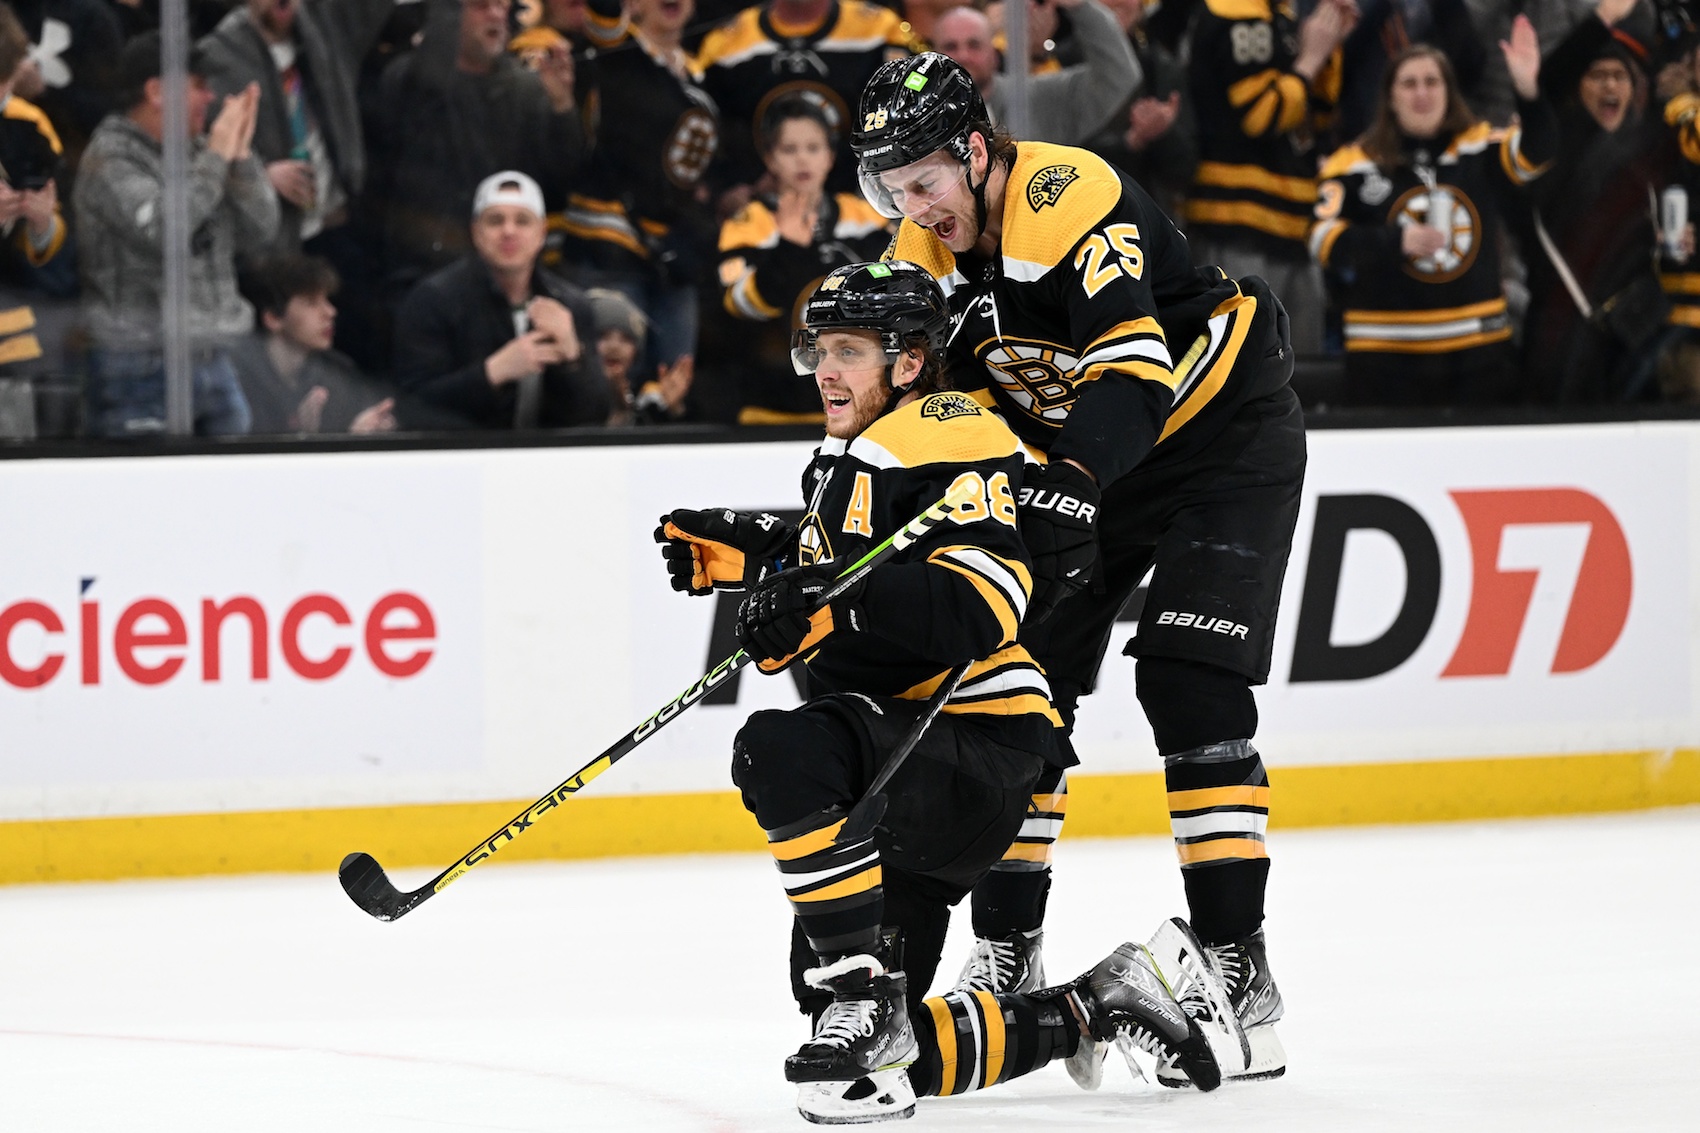 Mar 9, 2023; Boston, Massachusetts, USA; Boston Bruins right wing David Pastrnak (88) celebrates with defenseman Brandon Carlo (25) after scoring a goal against the Edmonton Oilers during the first period at the TD Garden. Mandatory Credit: Brian Fluharty-USA TODAY Sports